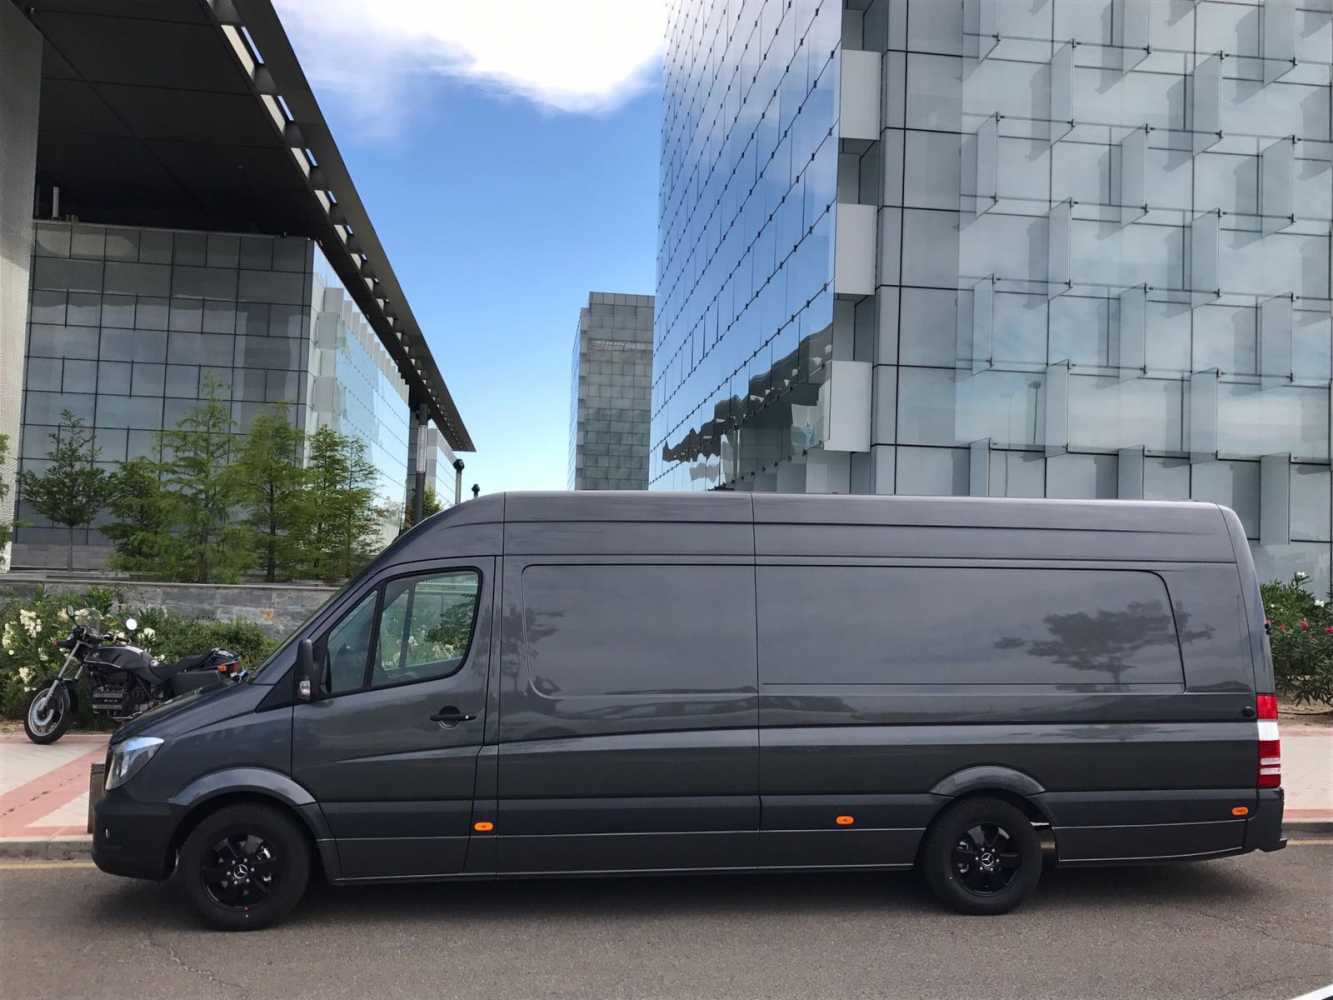 The extra-long wheelbase Mercedes Sprinter that has been fully equipped as a mobile showroom